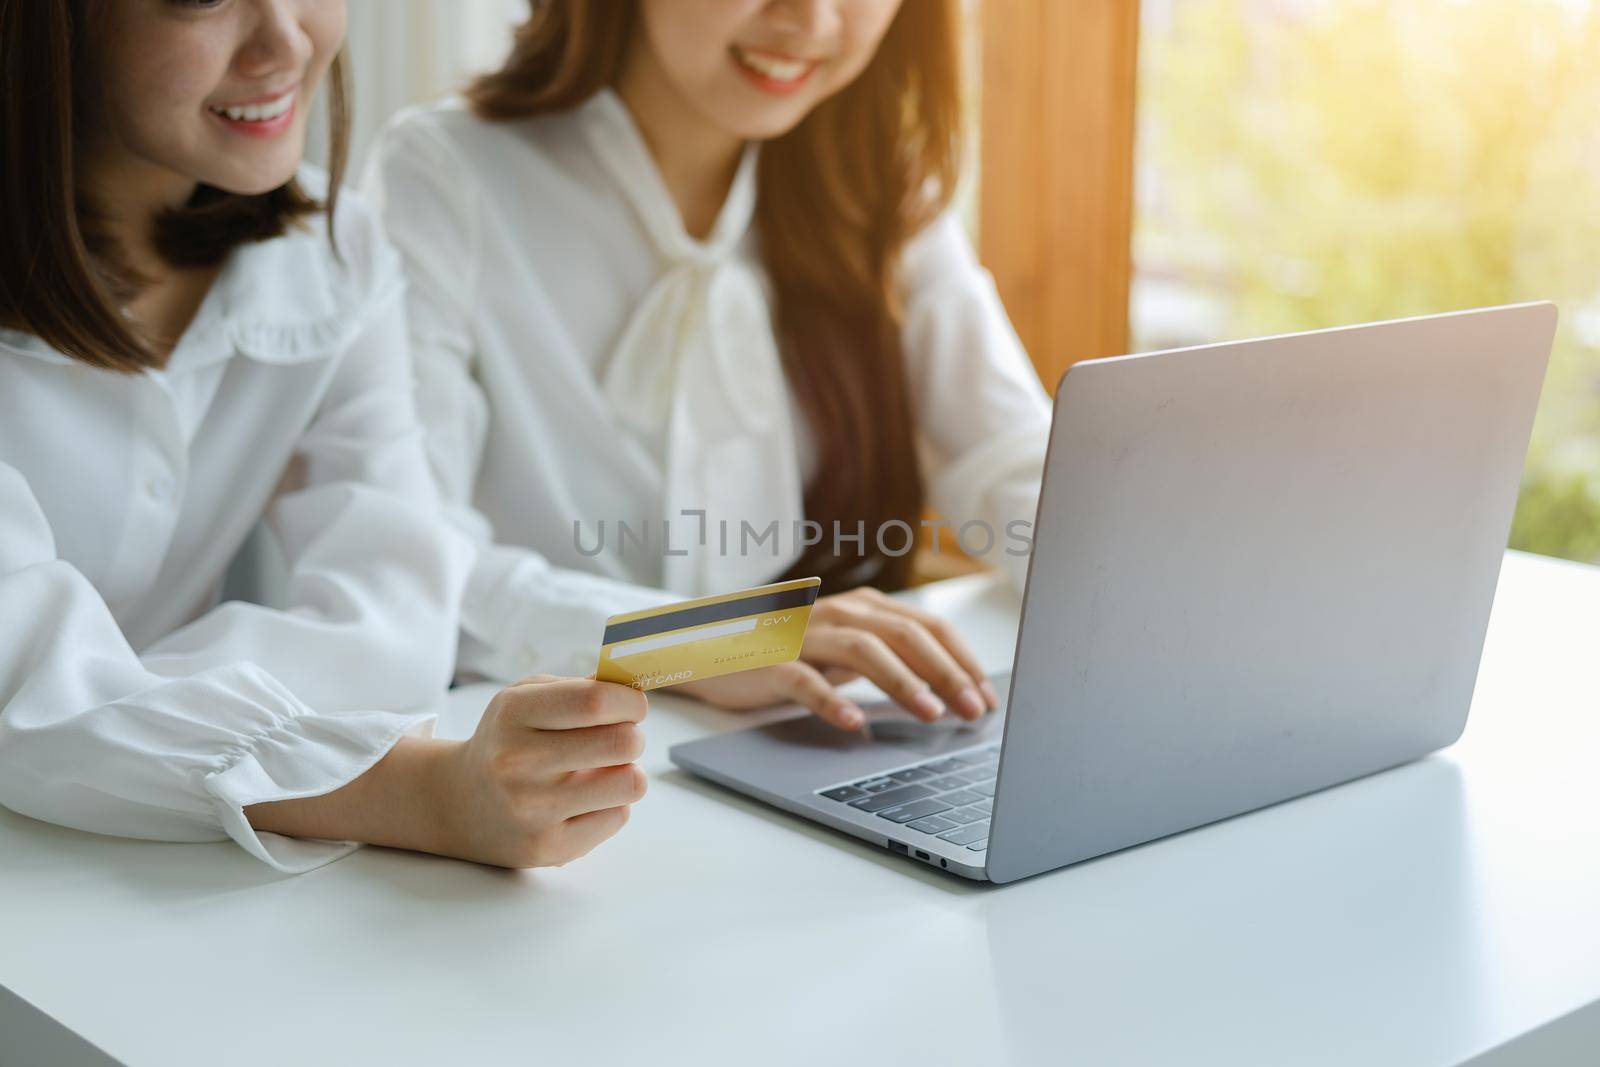 Online Shopping and Internet Payments, Beautiful Asian women are using their credit cards and computer laptop to shop online or conduct errands in the digital world by Manastrong